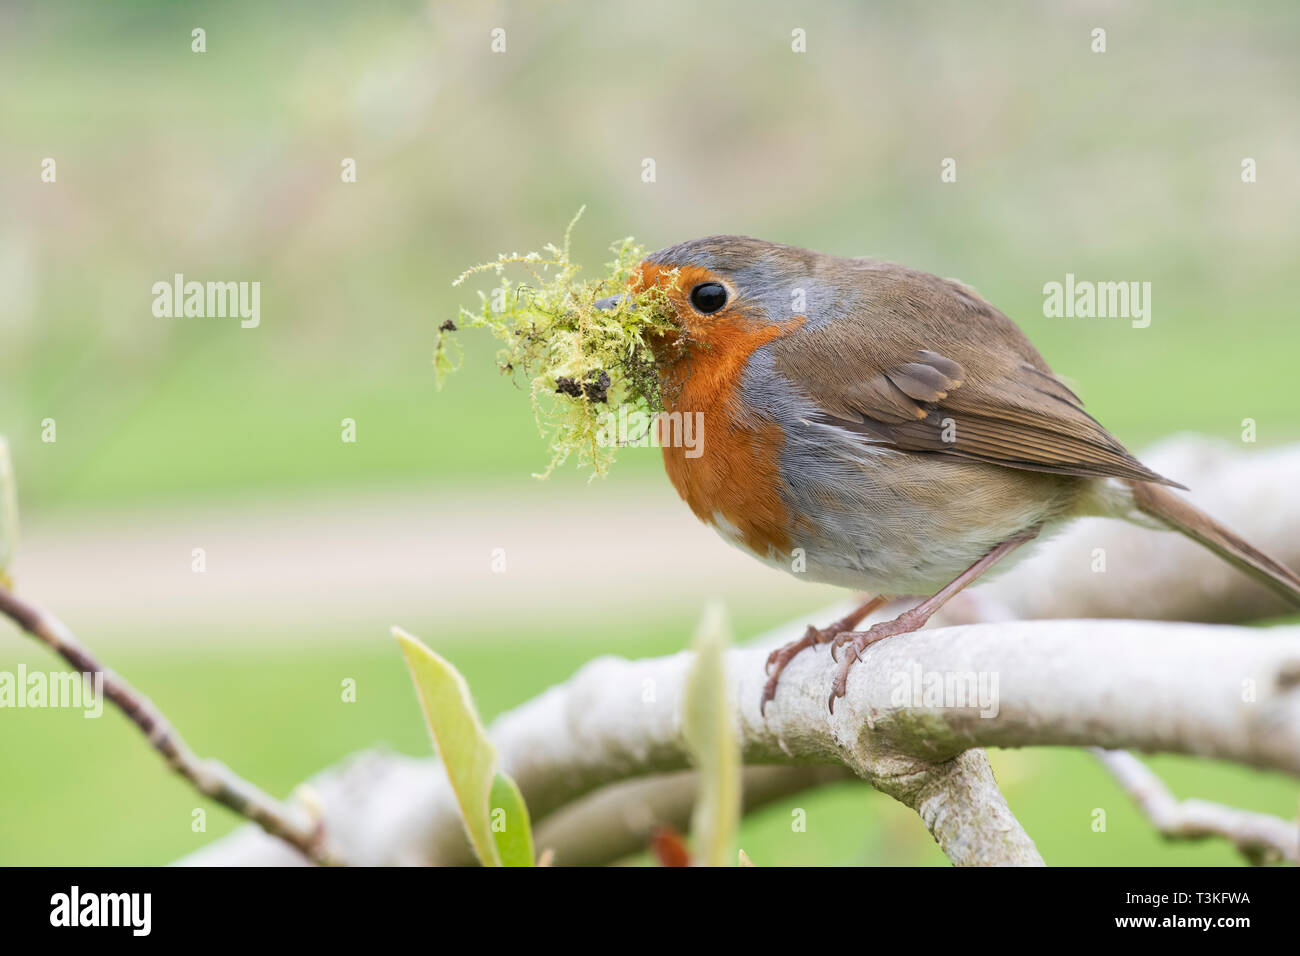 Erithacus Rubecula. Robin with nesting material in his beak in an English Garden Stock Photo